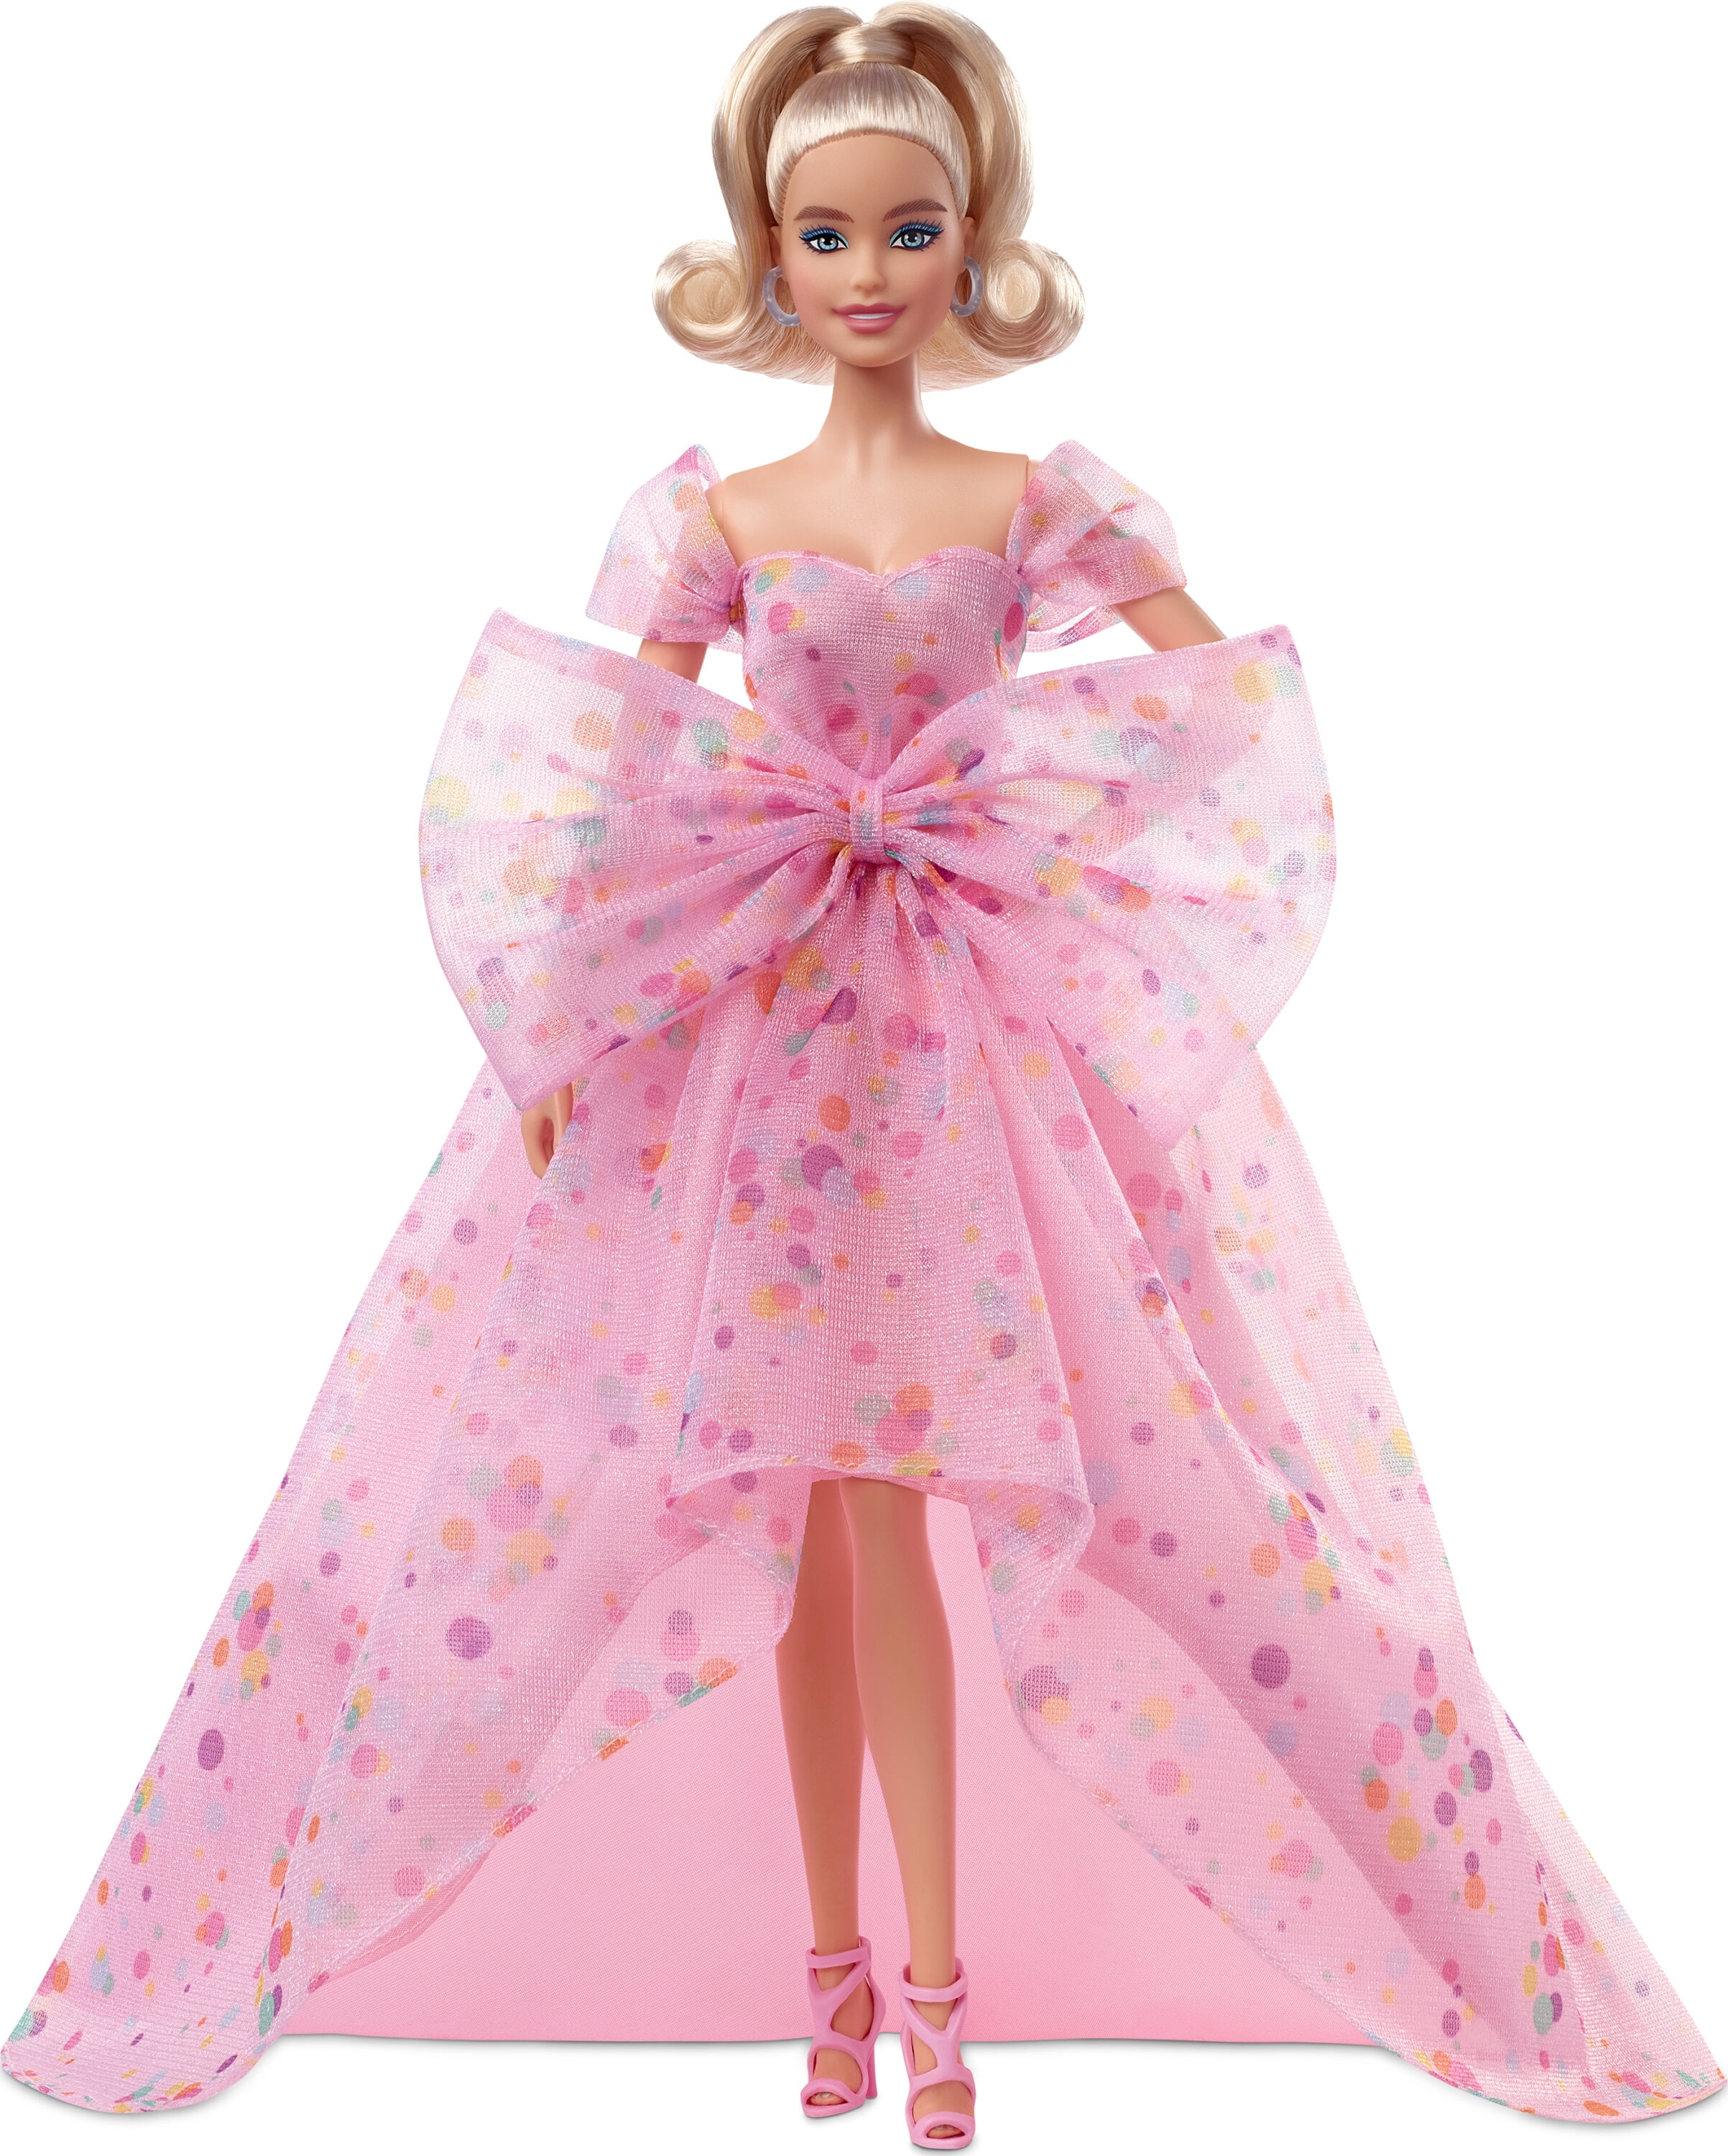 Barbie Signature Birthday Wishes Doll Wearing Pink Gown, Gift for 6 Year Olds & Up